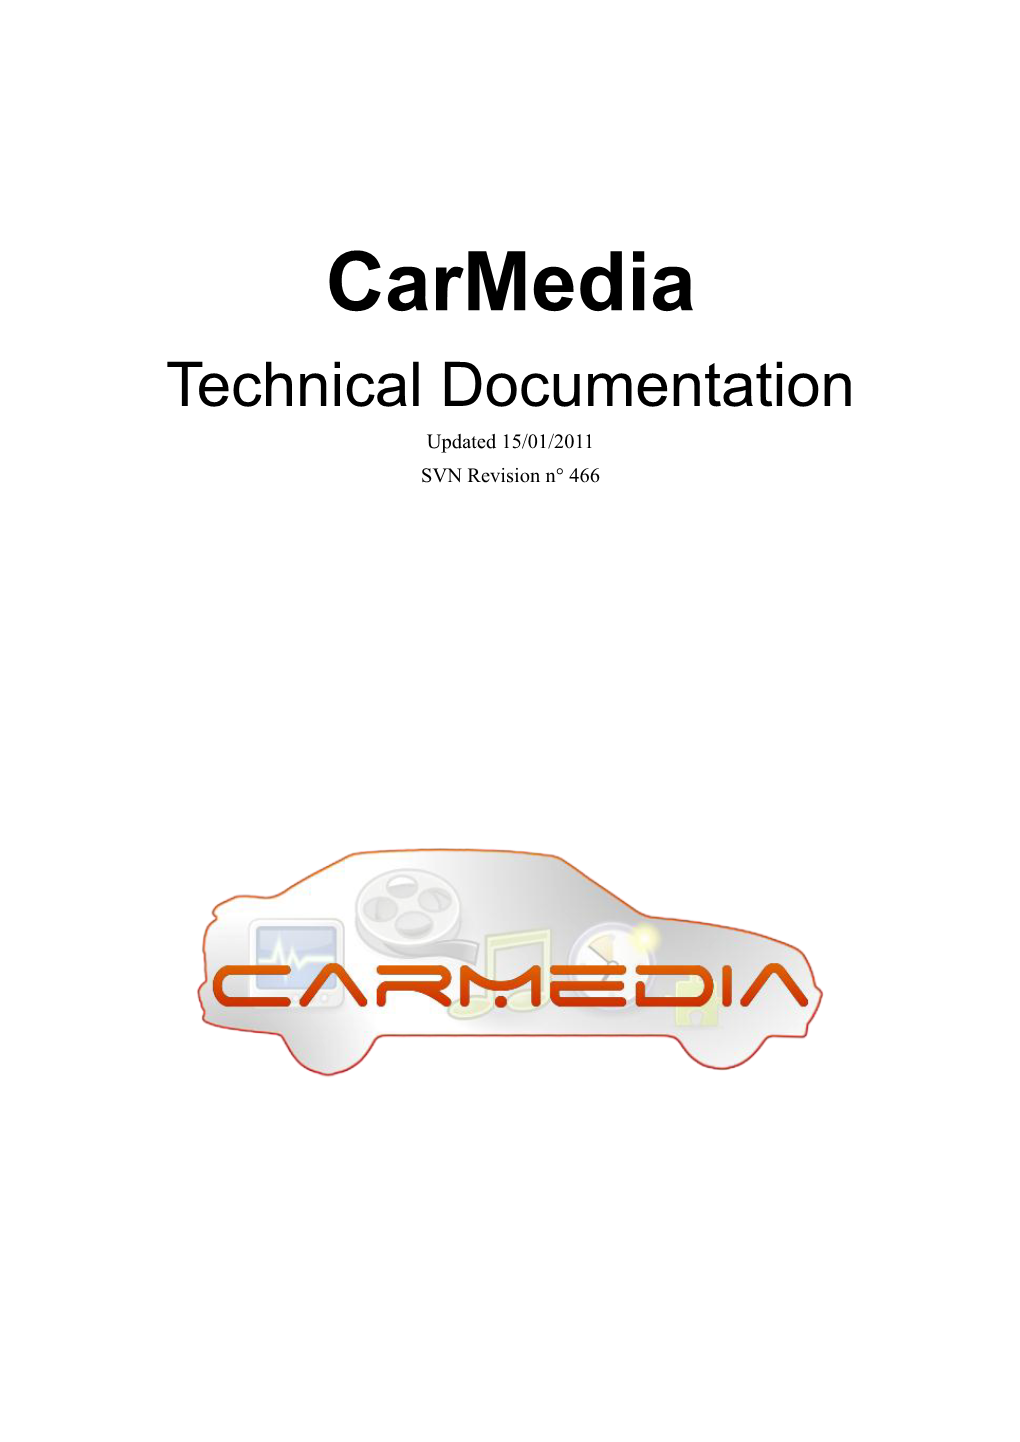 Carmedia Technical Documentation Updated 15/01/2011 SVN Revision N° 466